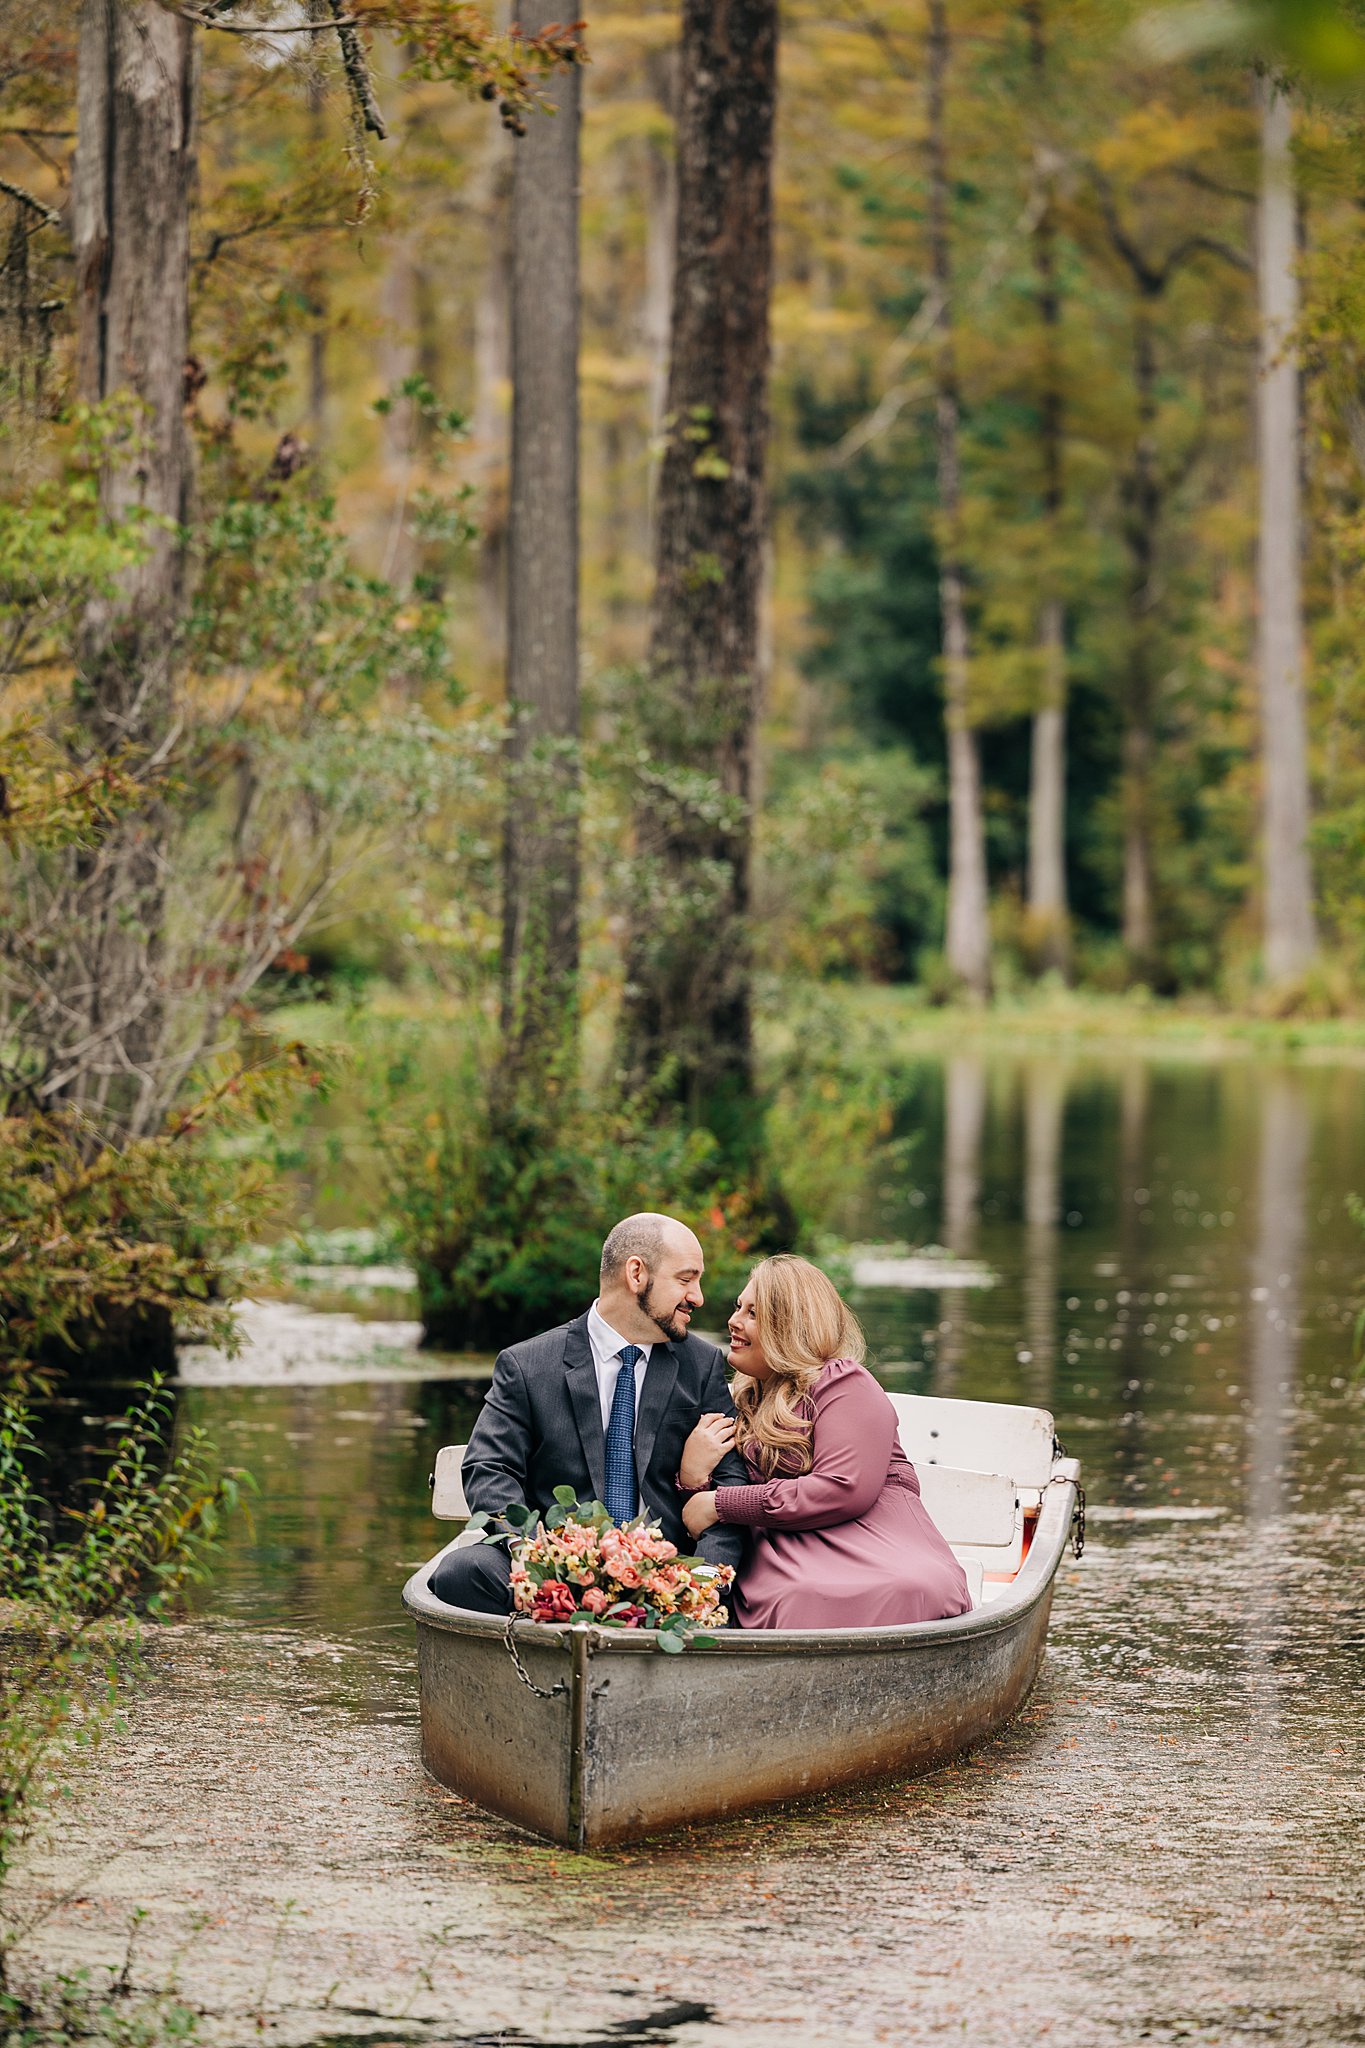 A couple snuggle while floating in a small boat in a swamp